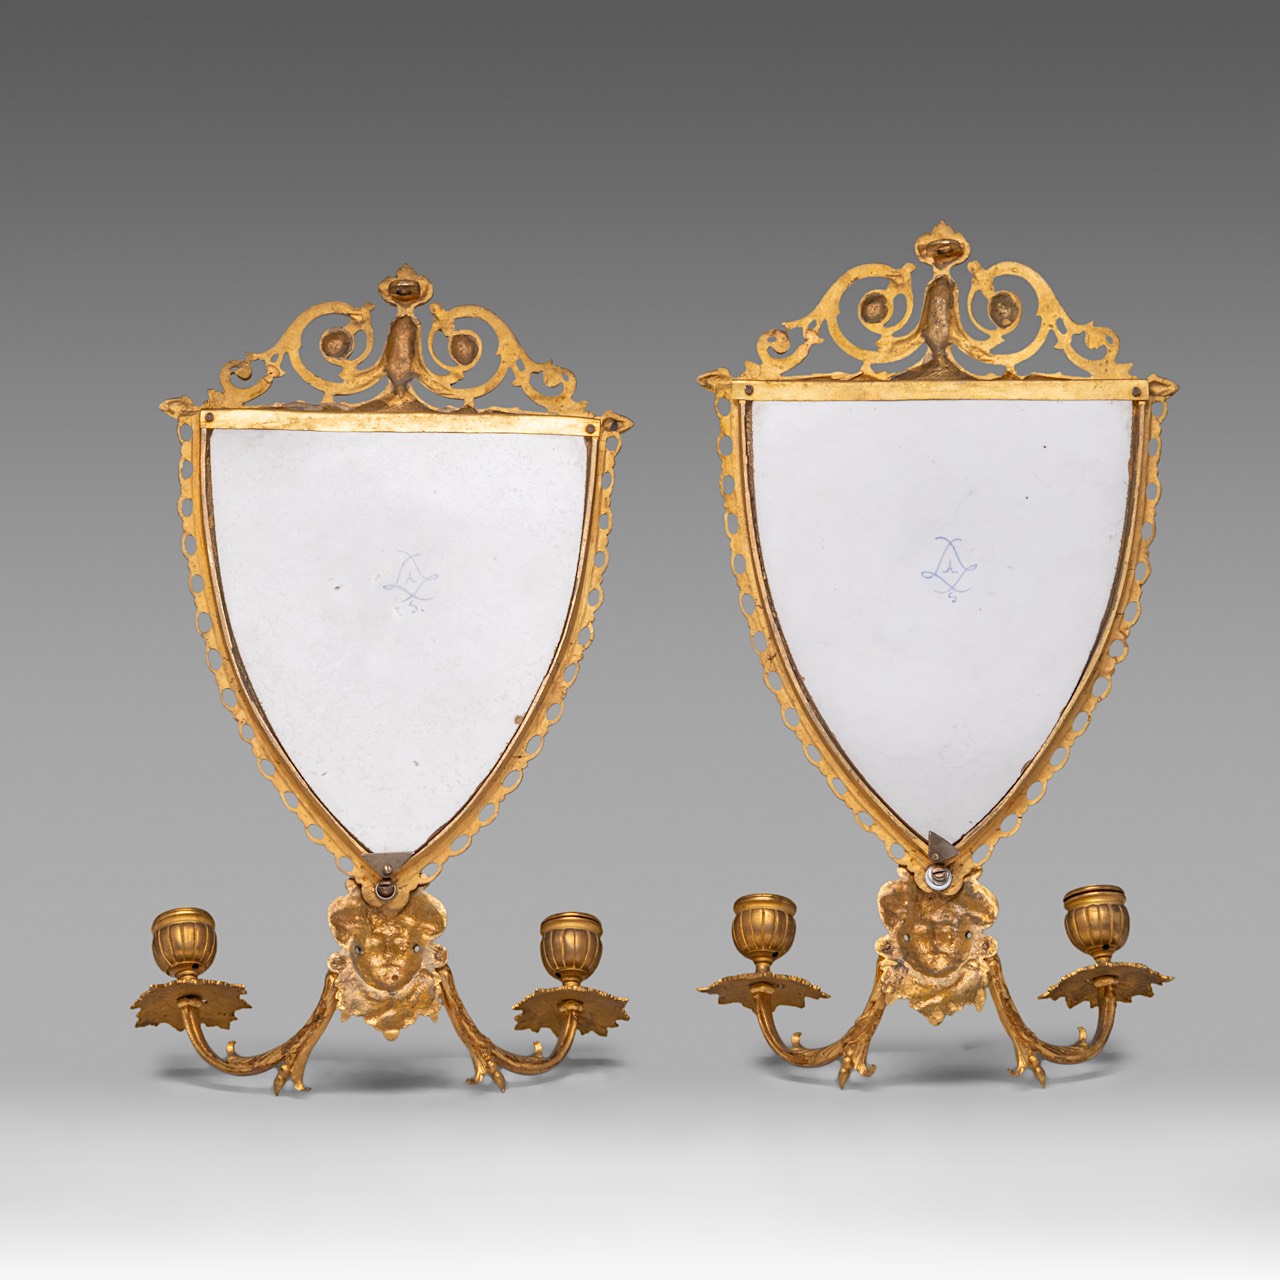 A pair of Louis XVI style Sevres porcelain and gilt bronze wall appliques, H 42 cm - Image 2 of 6